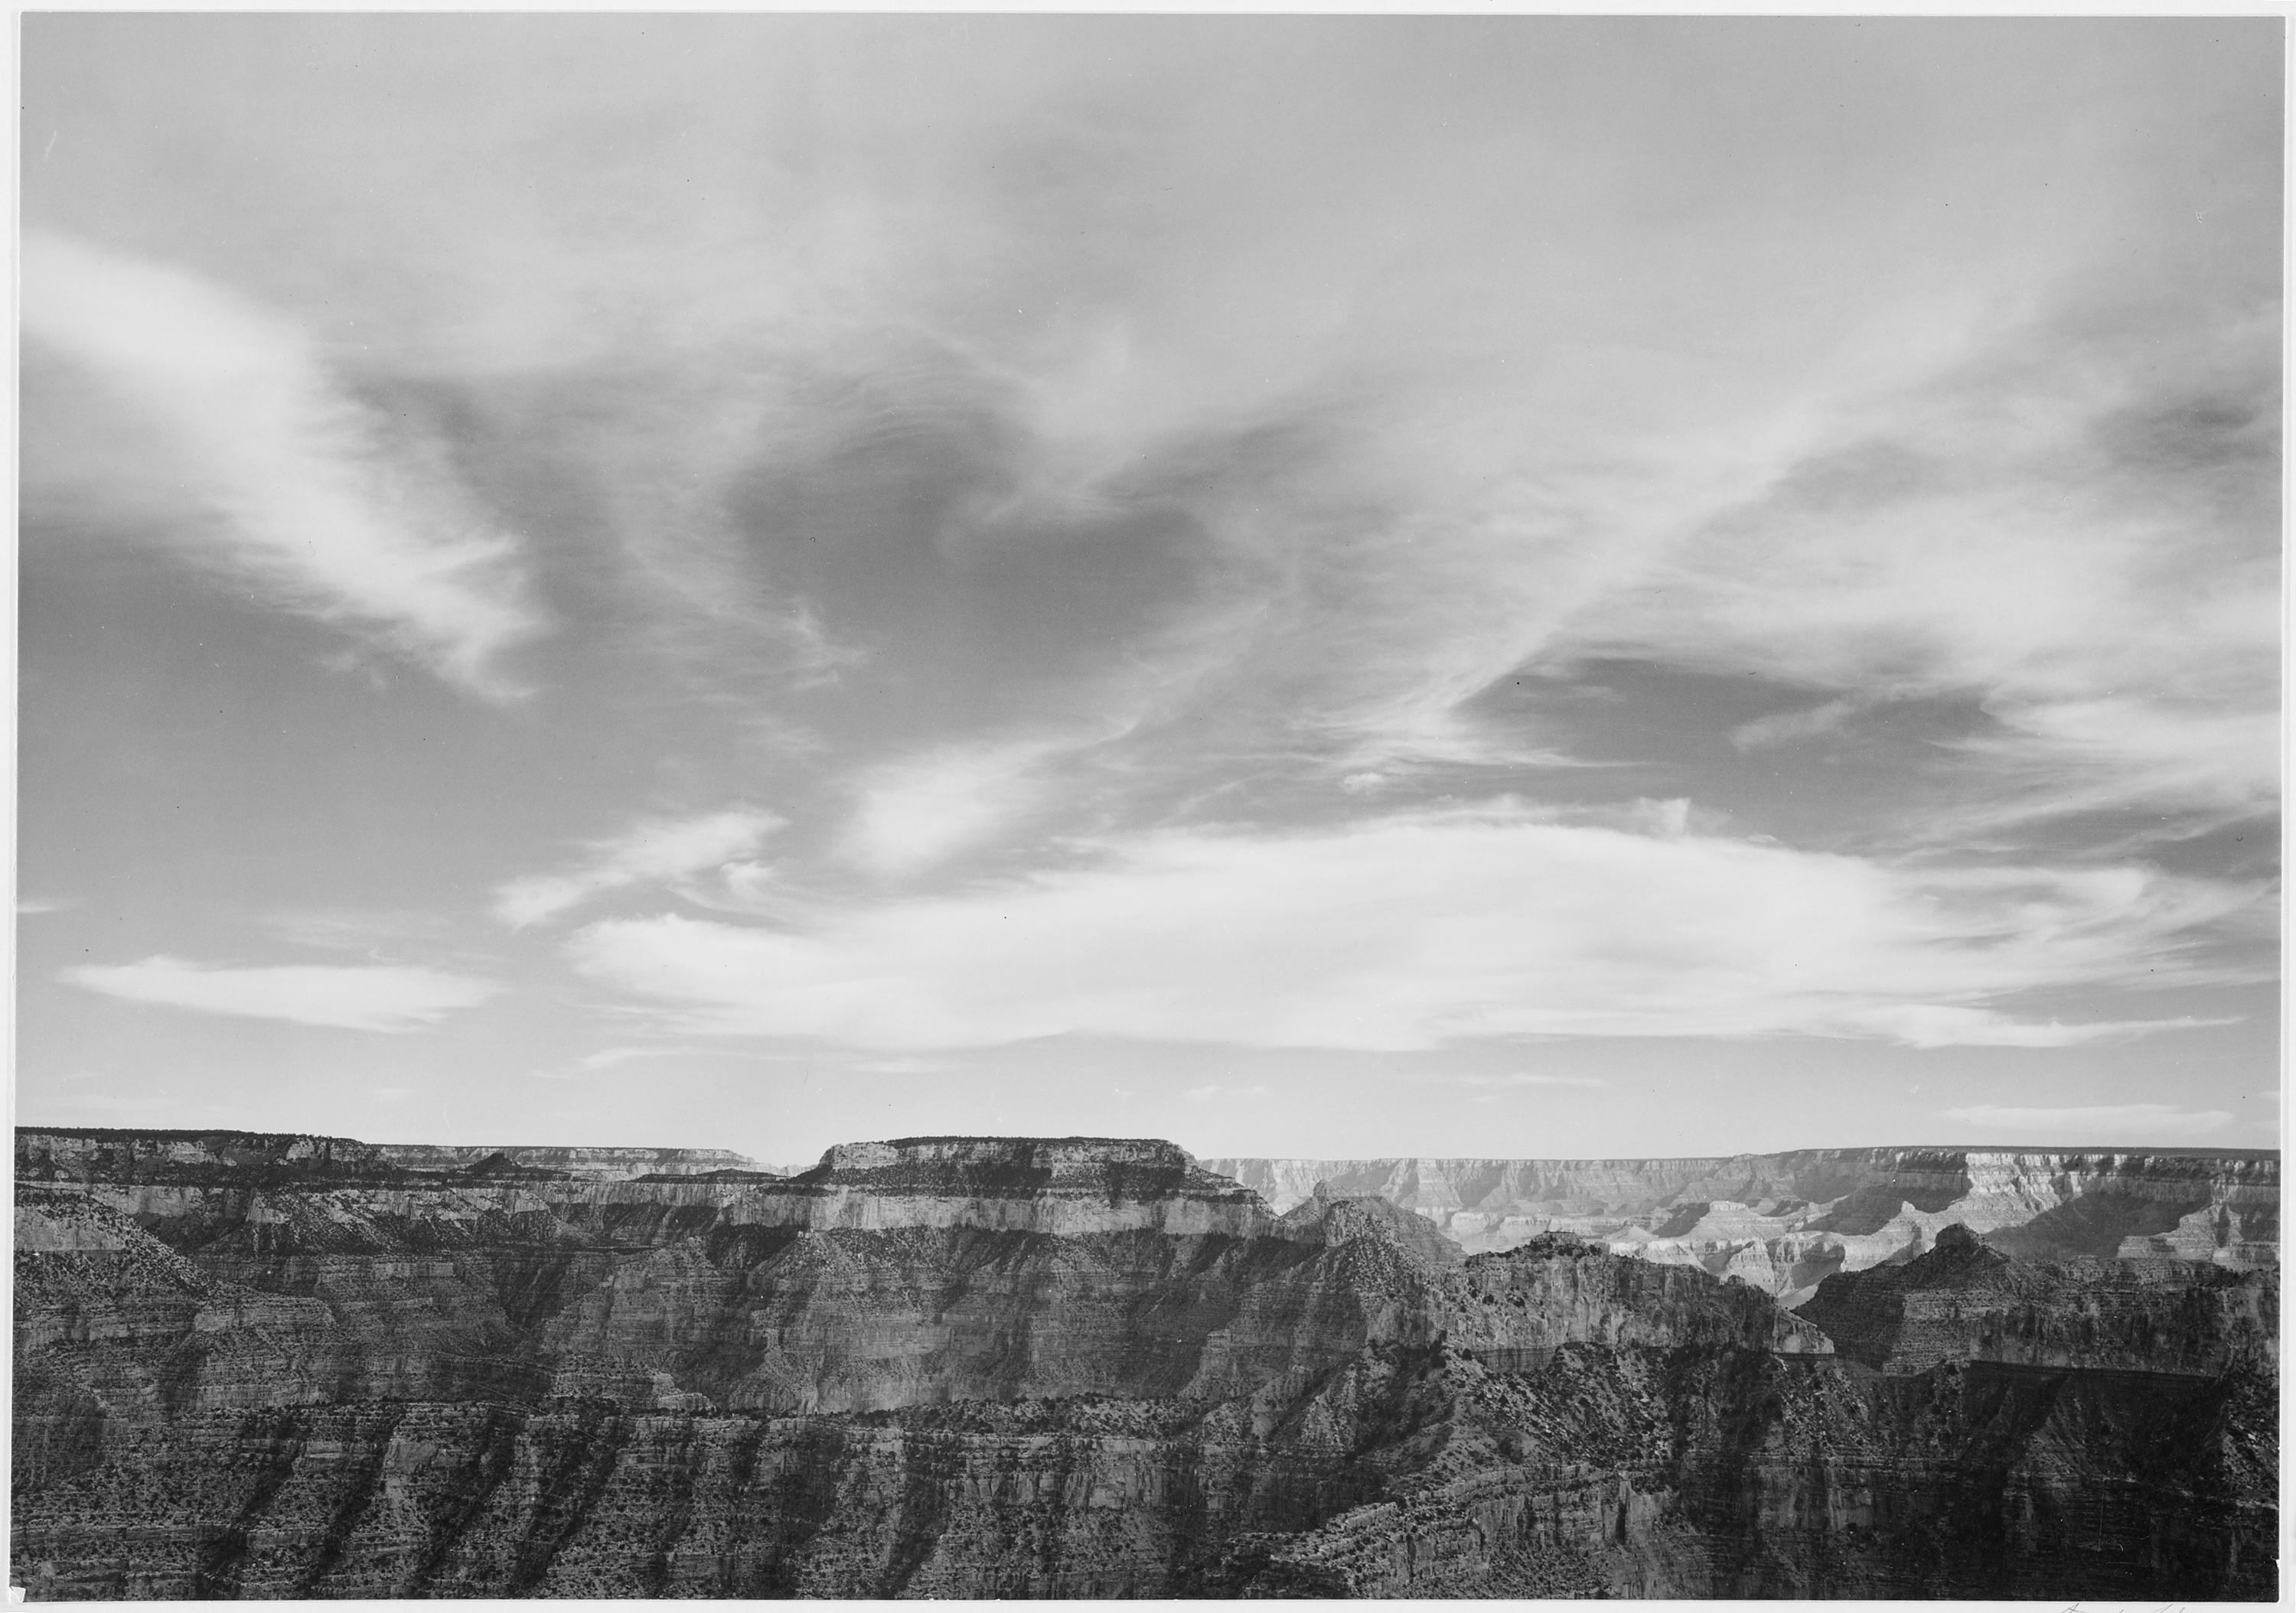 Ansel Adams - National Archives 79-AA-F24